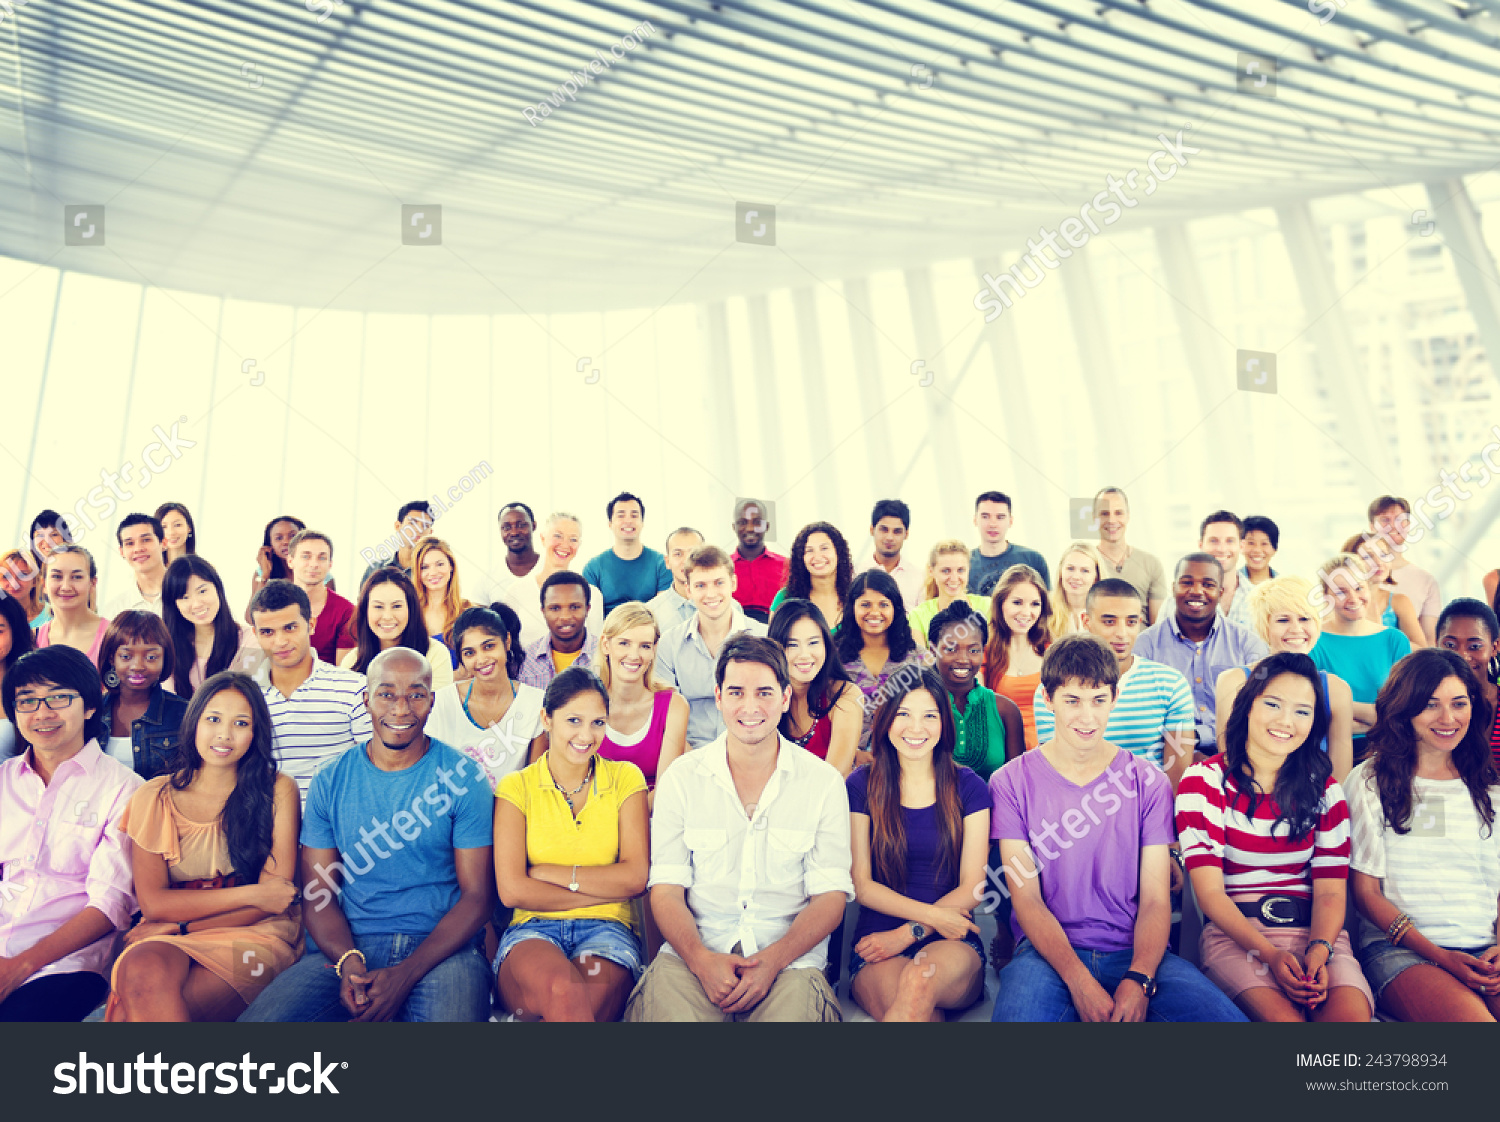 Group People Crowd Audience Casual Multicolored Sitting Concept #243798934